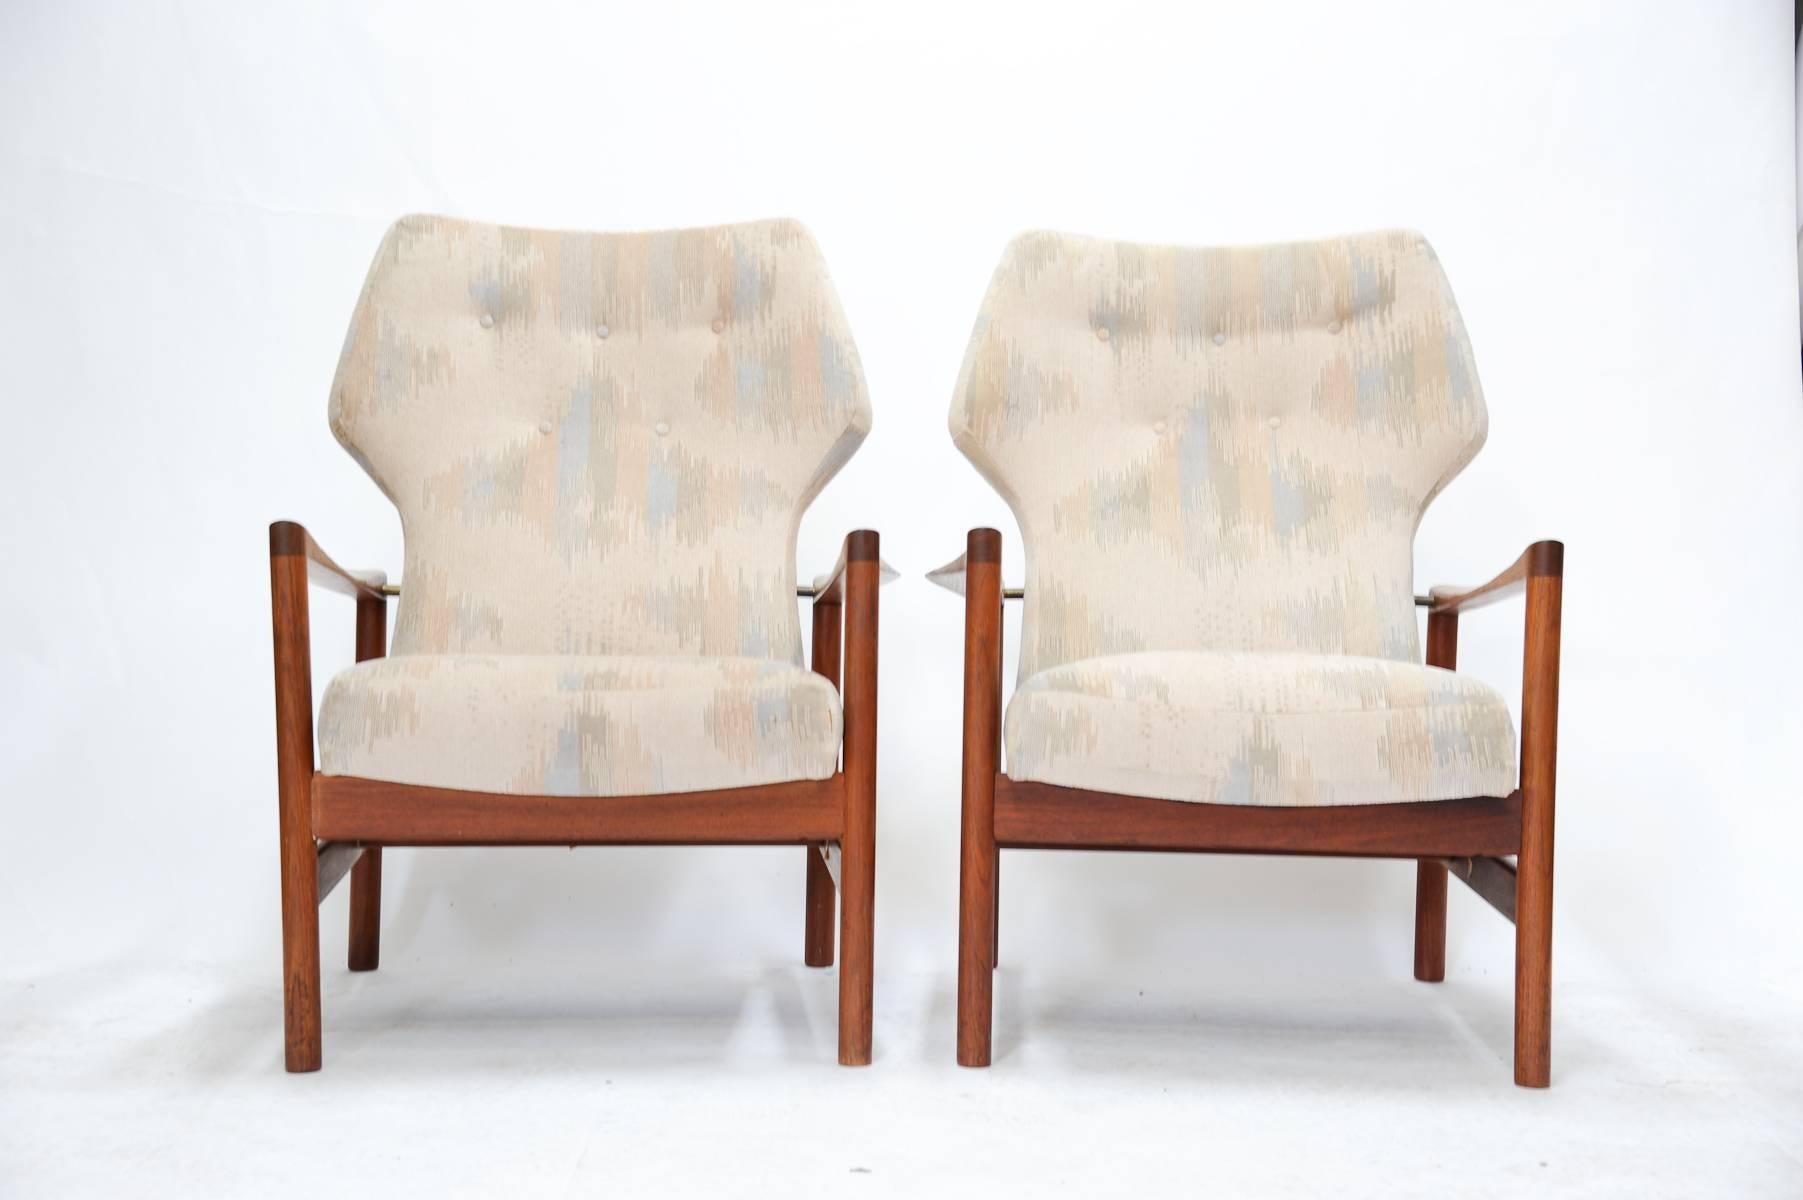 A wonderful pair of Westnofa Club Chairs by Alfred Rellings.  The chairs are finely detailed and have brass connection points.  The arms are flared and sculpted for comfort and style. Arm height is 24"